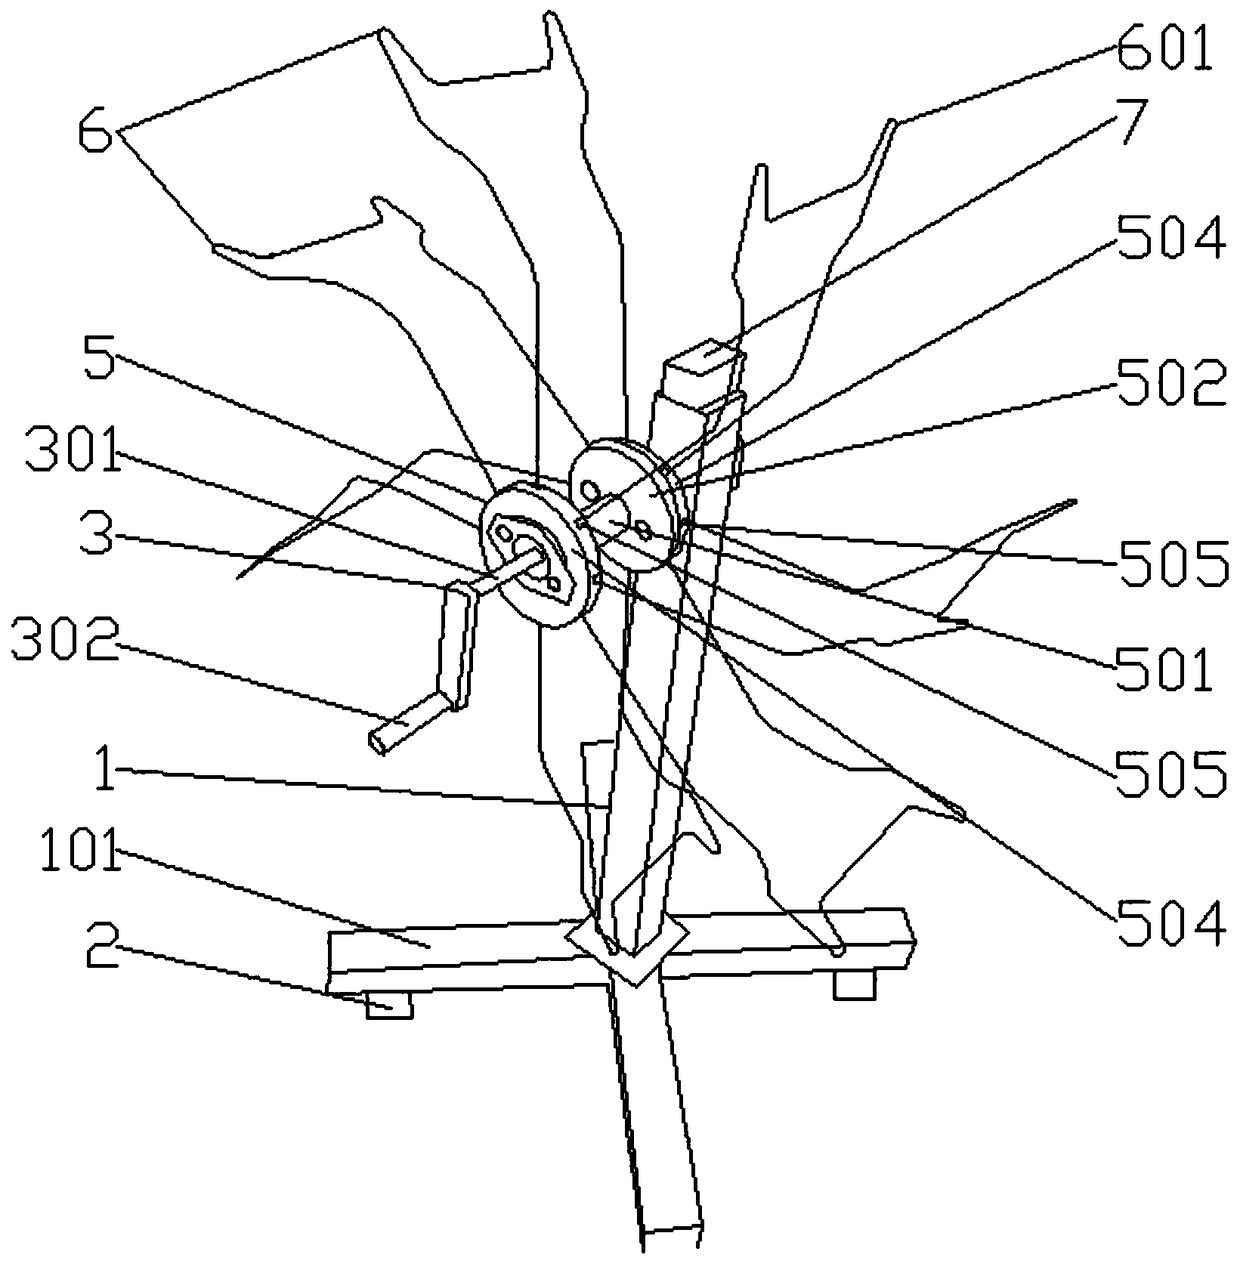 Yarn arranging system capable of being easily operated